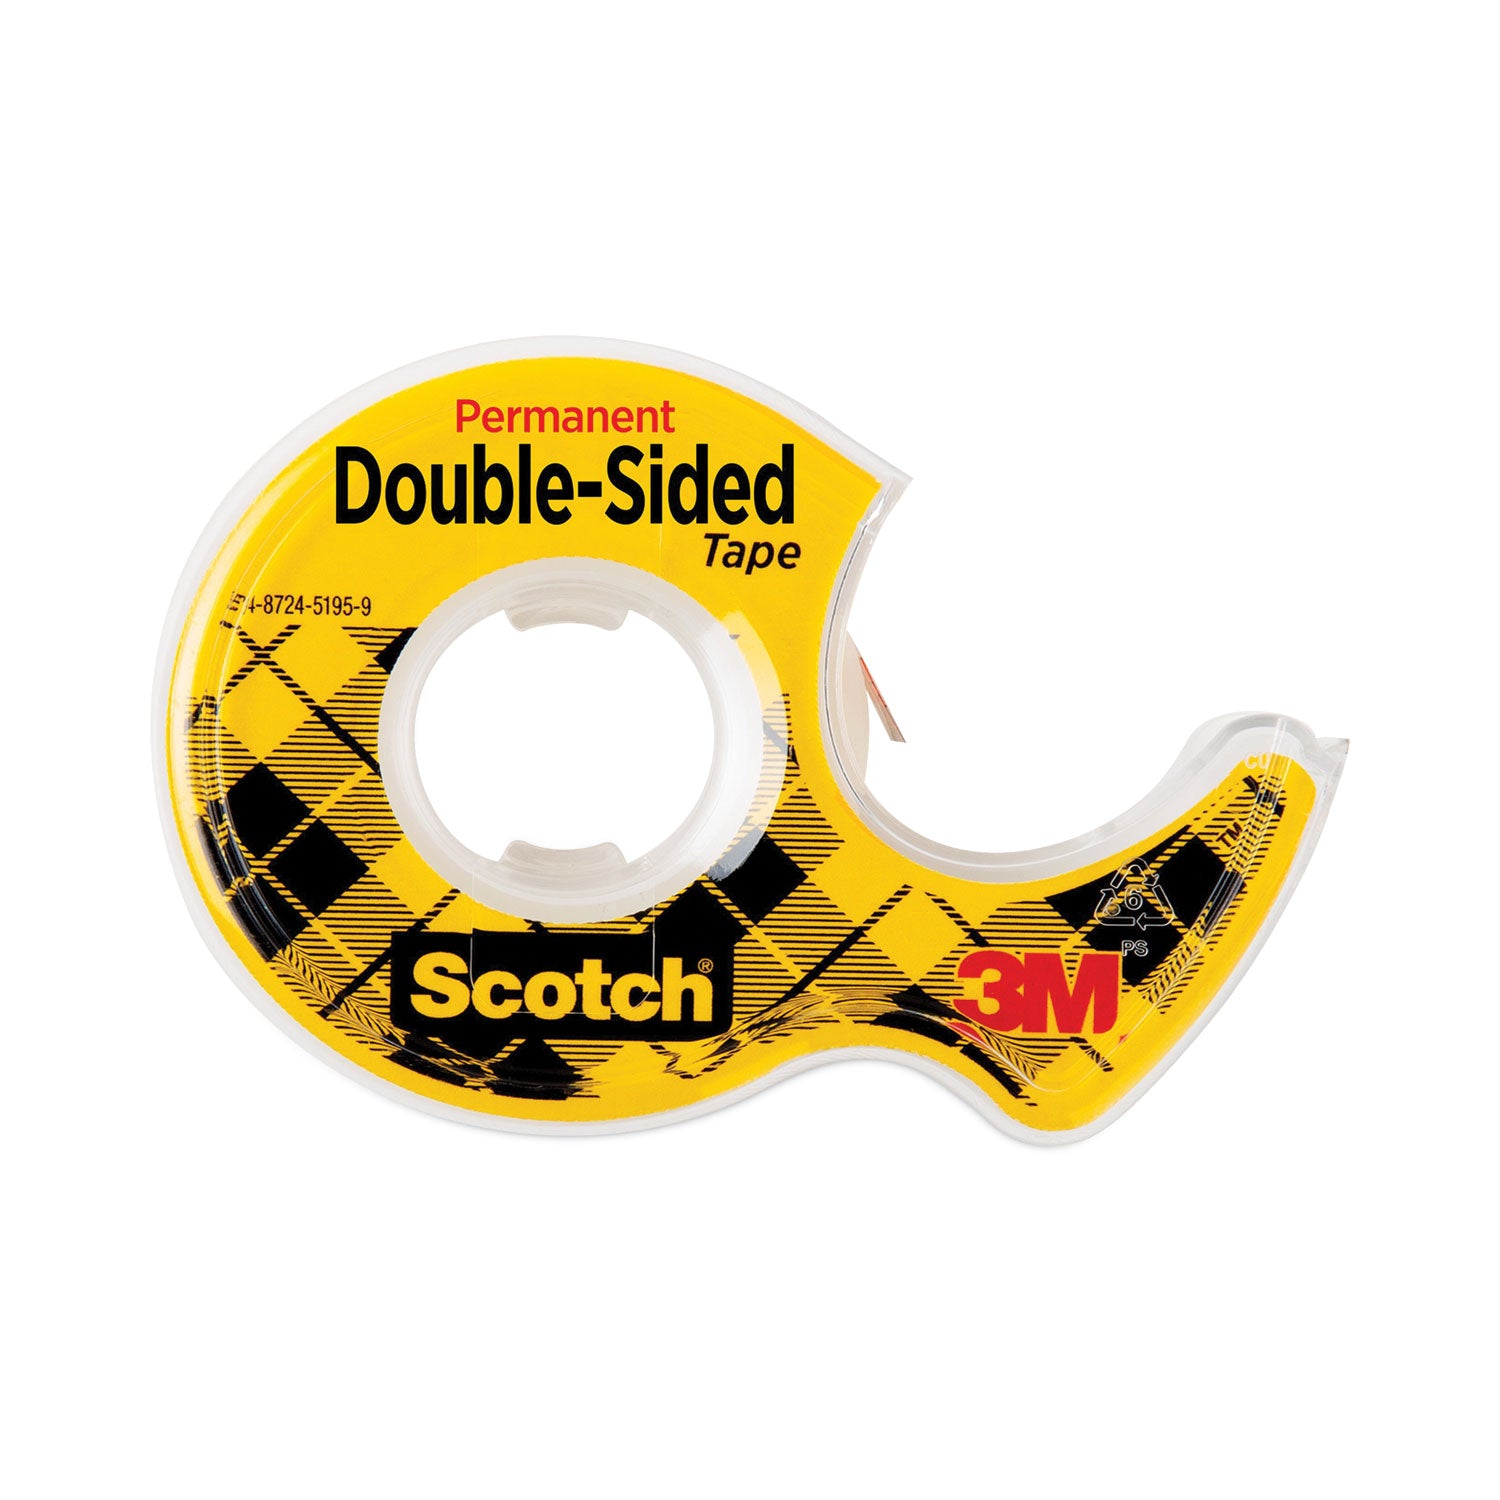 Double-Sided Permanent Tape in Handheld Dispenser, 1" Core, 0.5" x 20.83 ft, Clear - 